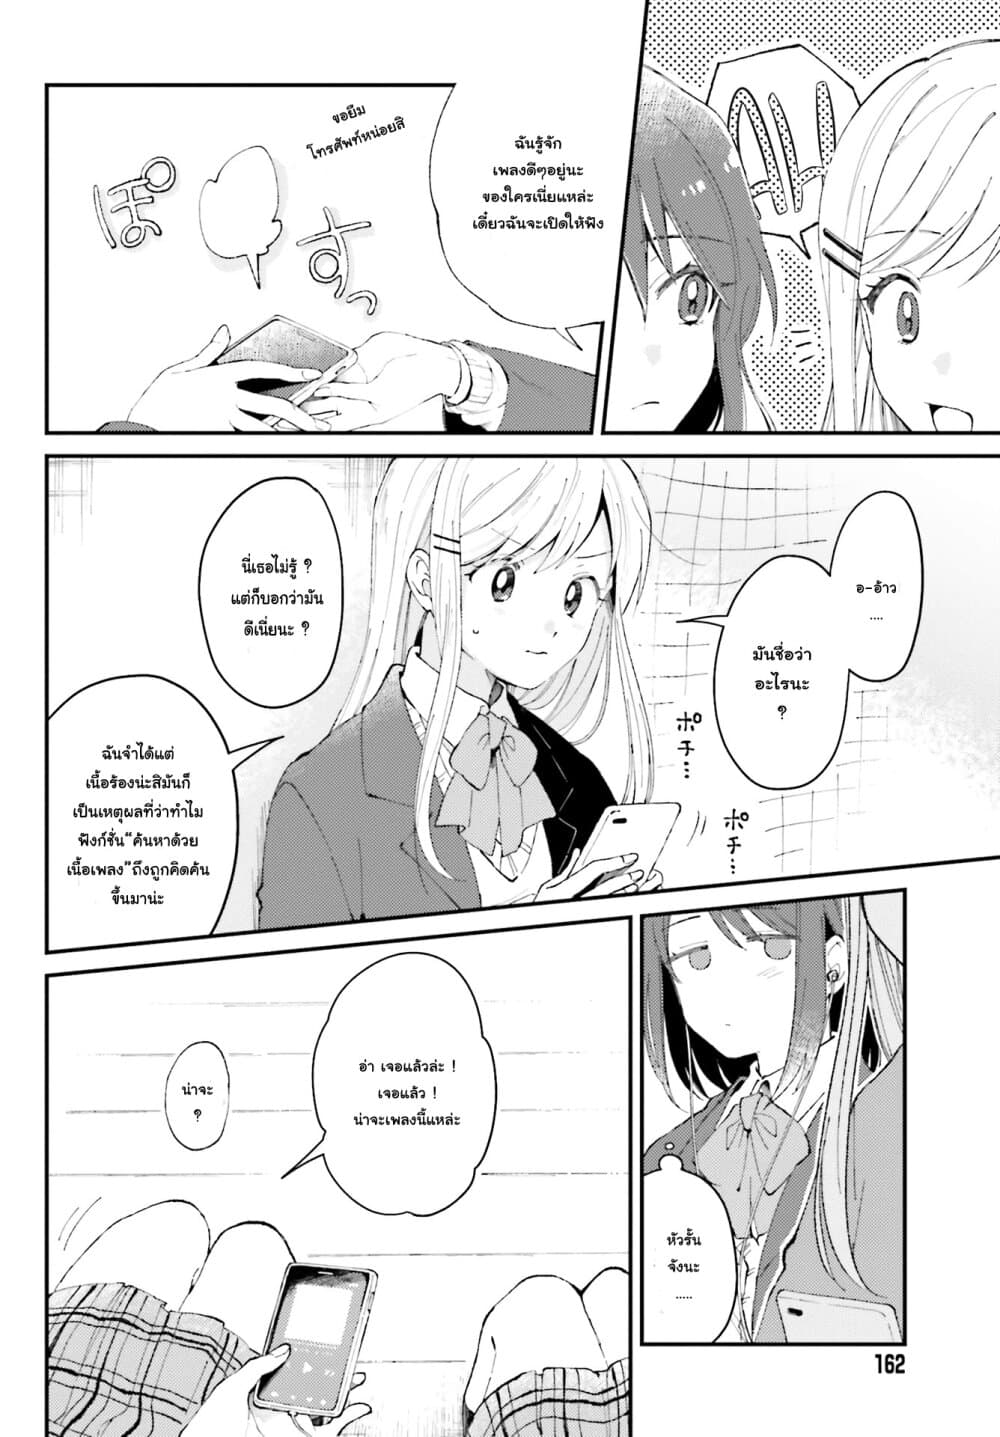 Adachi-to-Shimamura-Official-Comic-Anthology-Chapter2-4.jpg